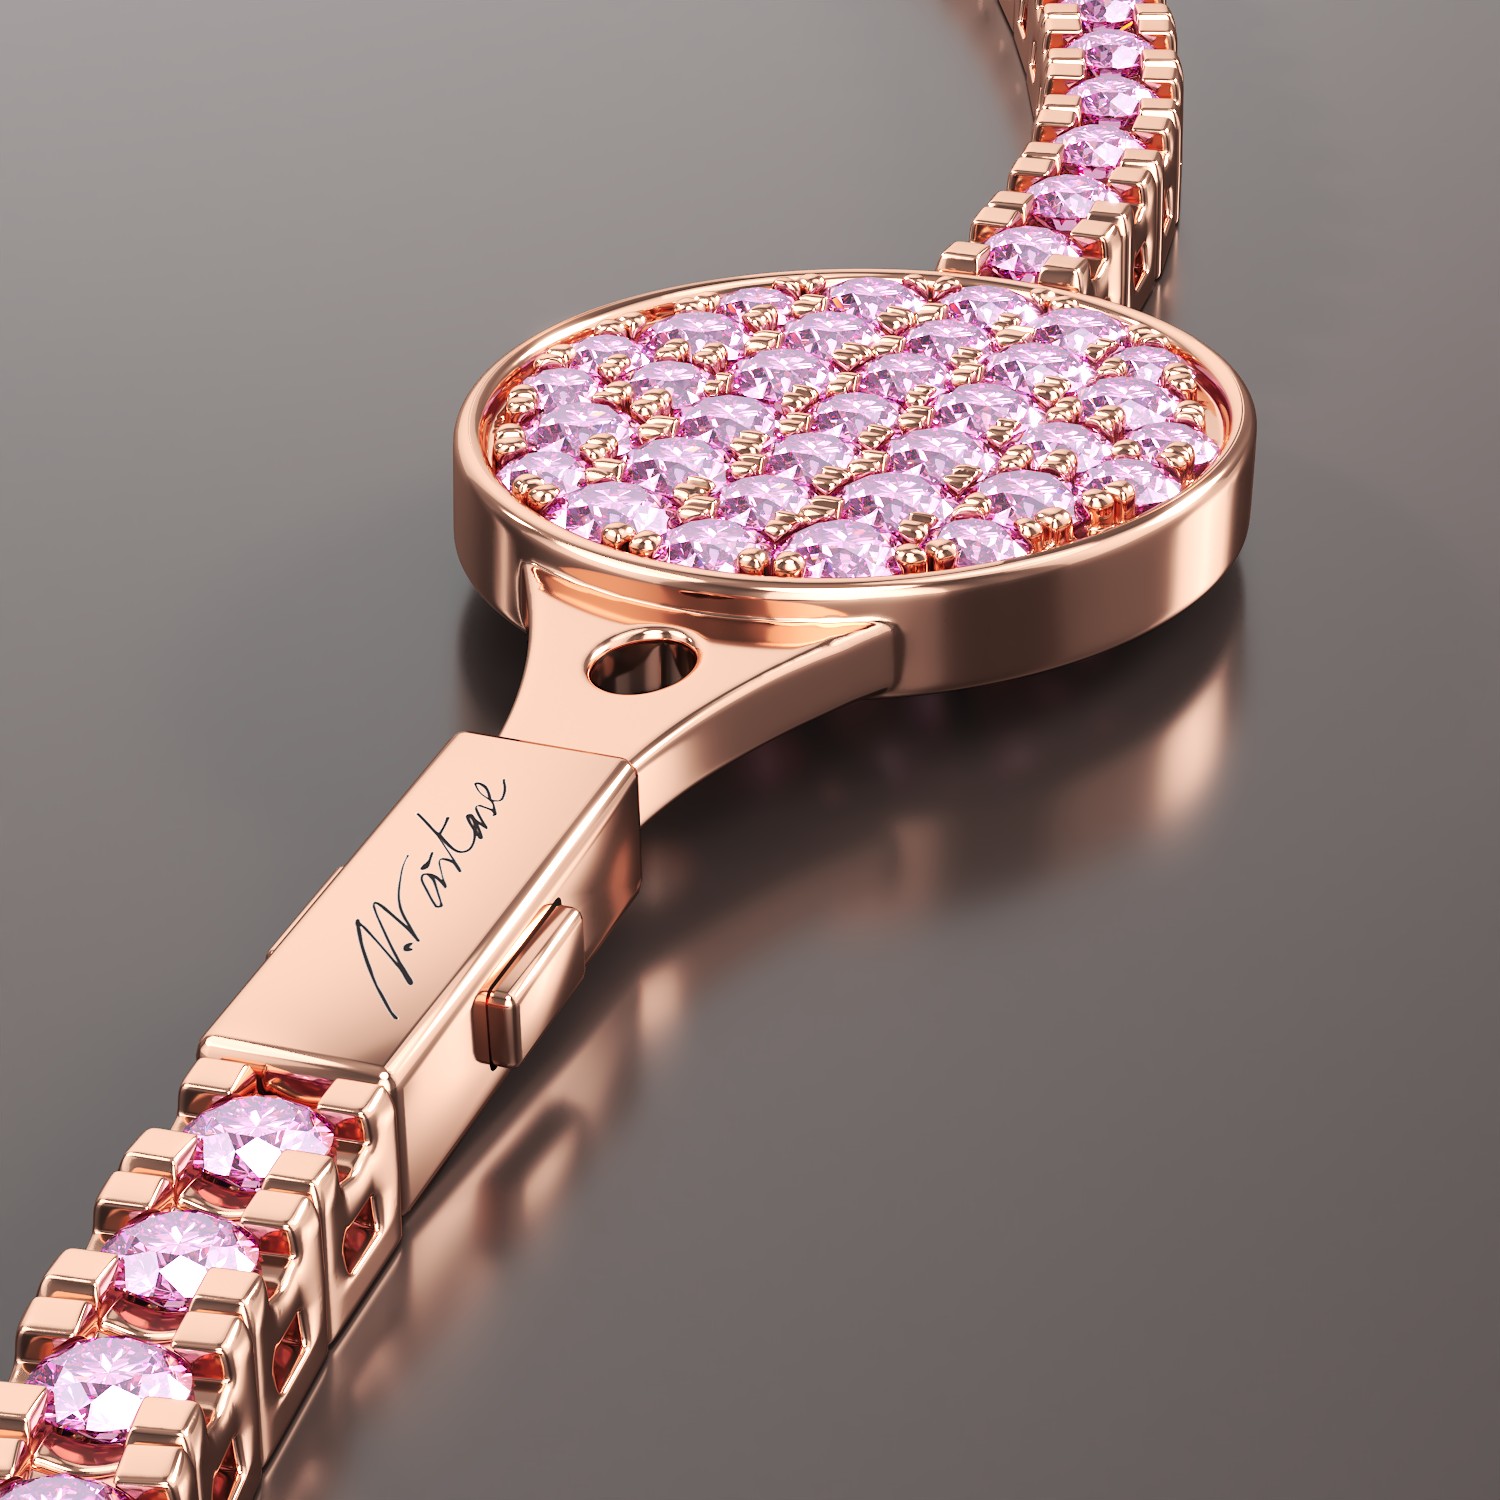 Glory tennis bracelet with 1.82ct pink sapphires